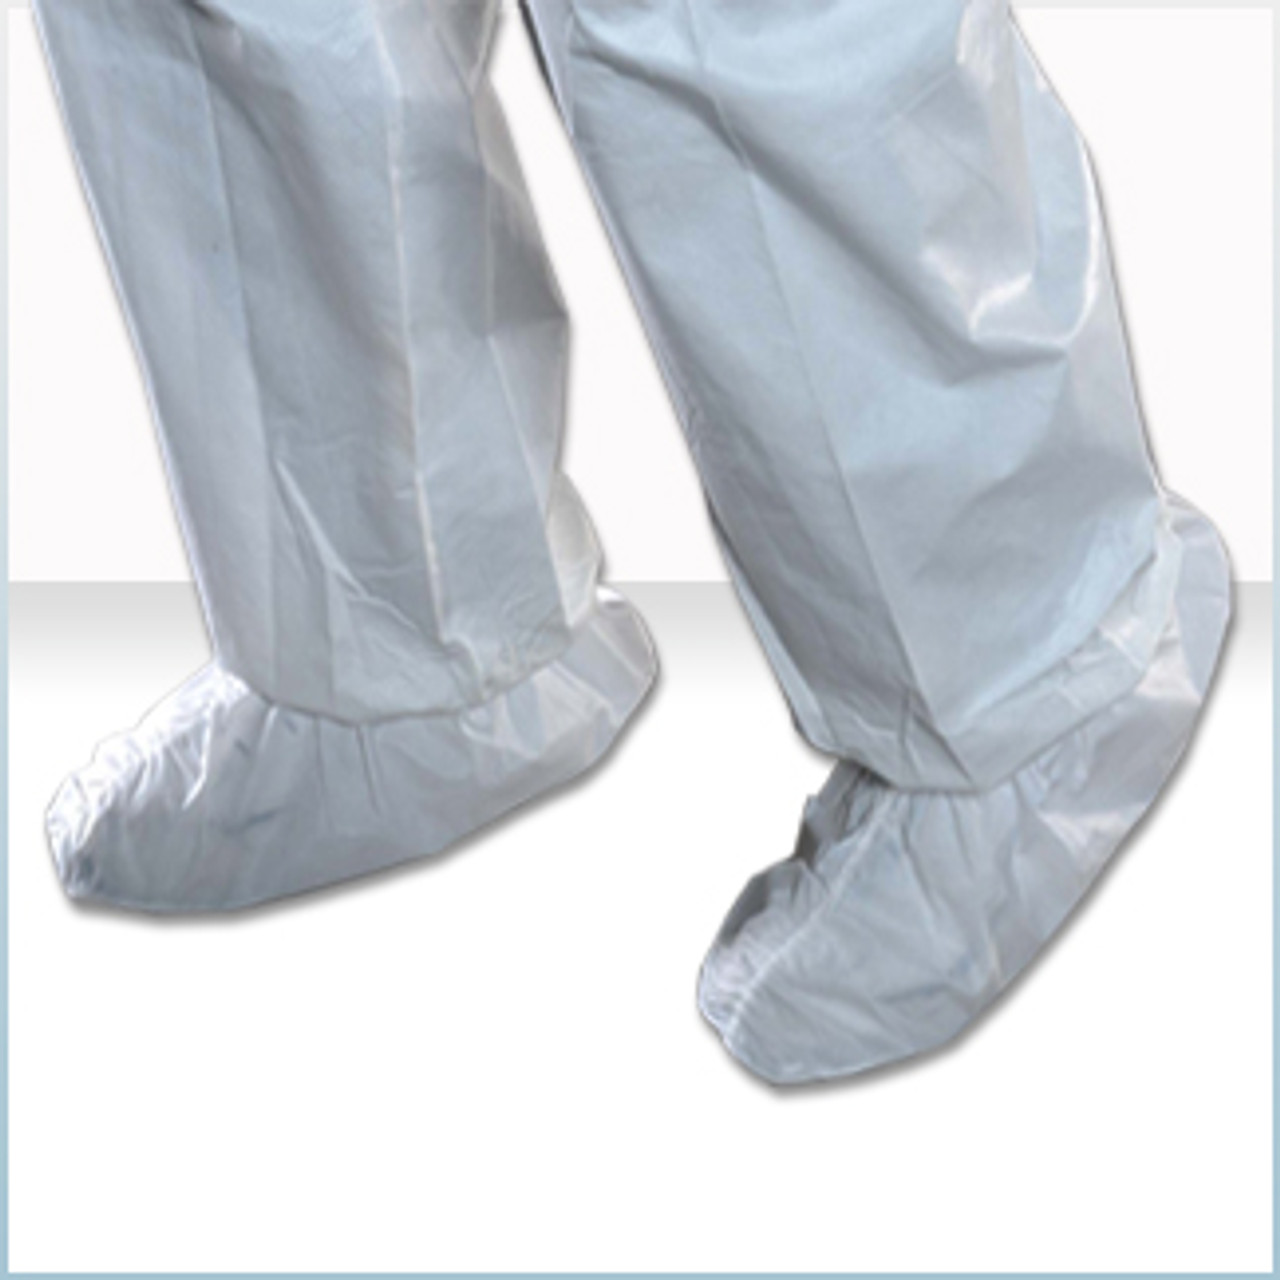 Cleanroom Shoe Covers, CPE, Fluid Impervious, XL, 500 pairs/case, White ...